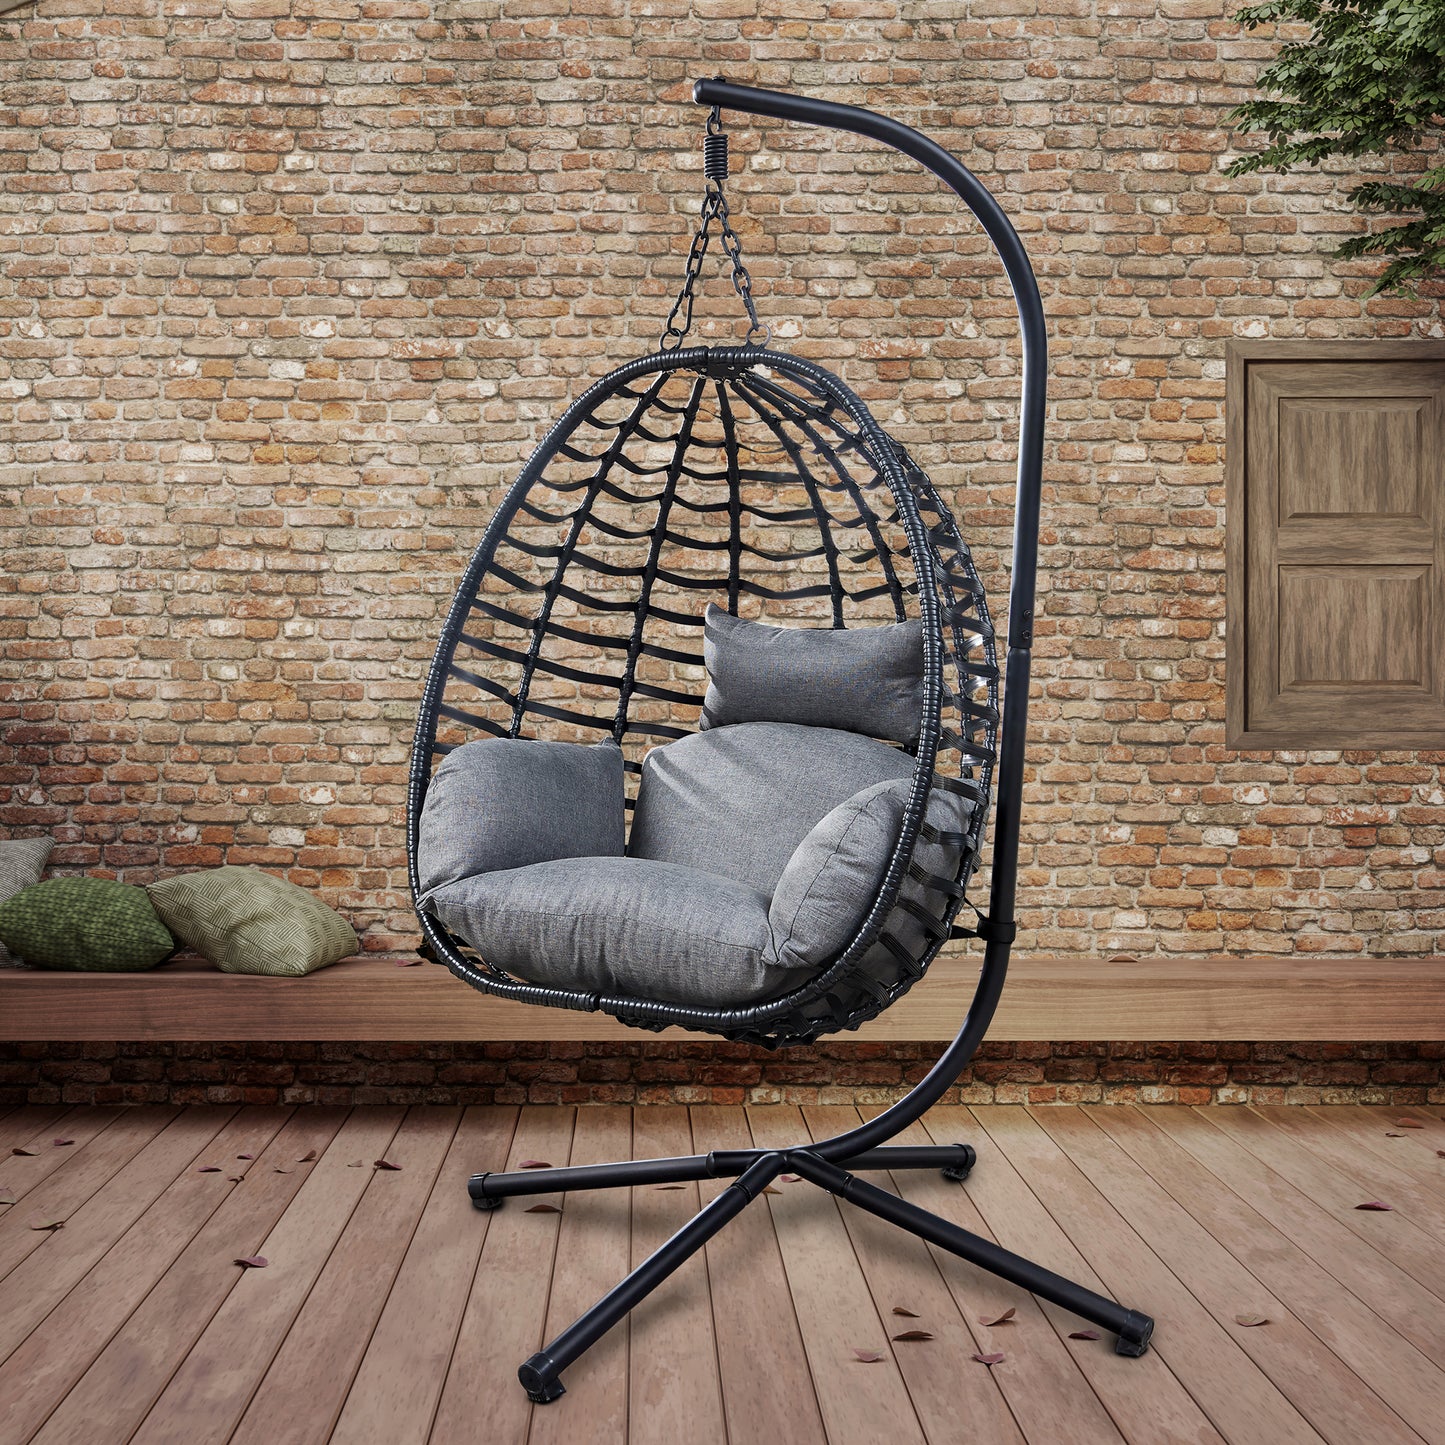 Artisan Outdoor Wicker Swing Chair With Stand for Balcony, 37"Lx35"Dx78"H (Grey)